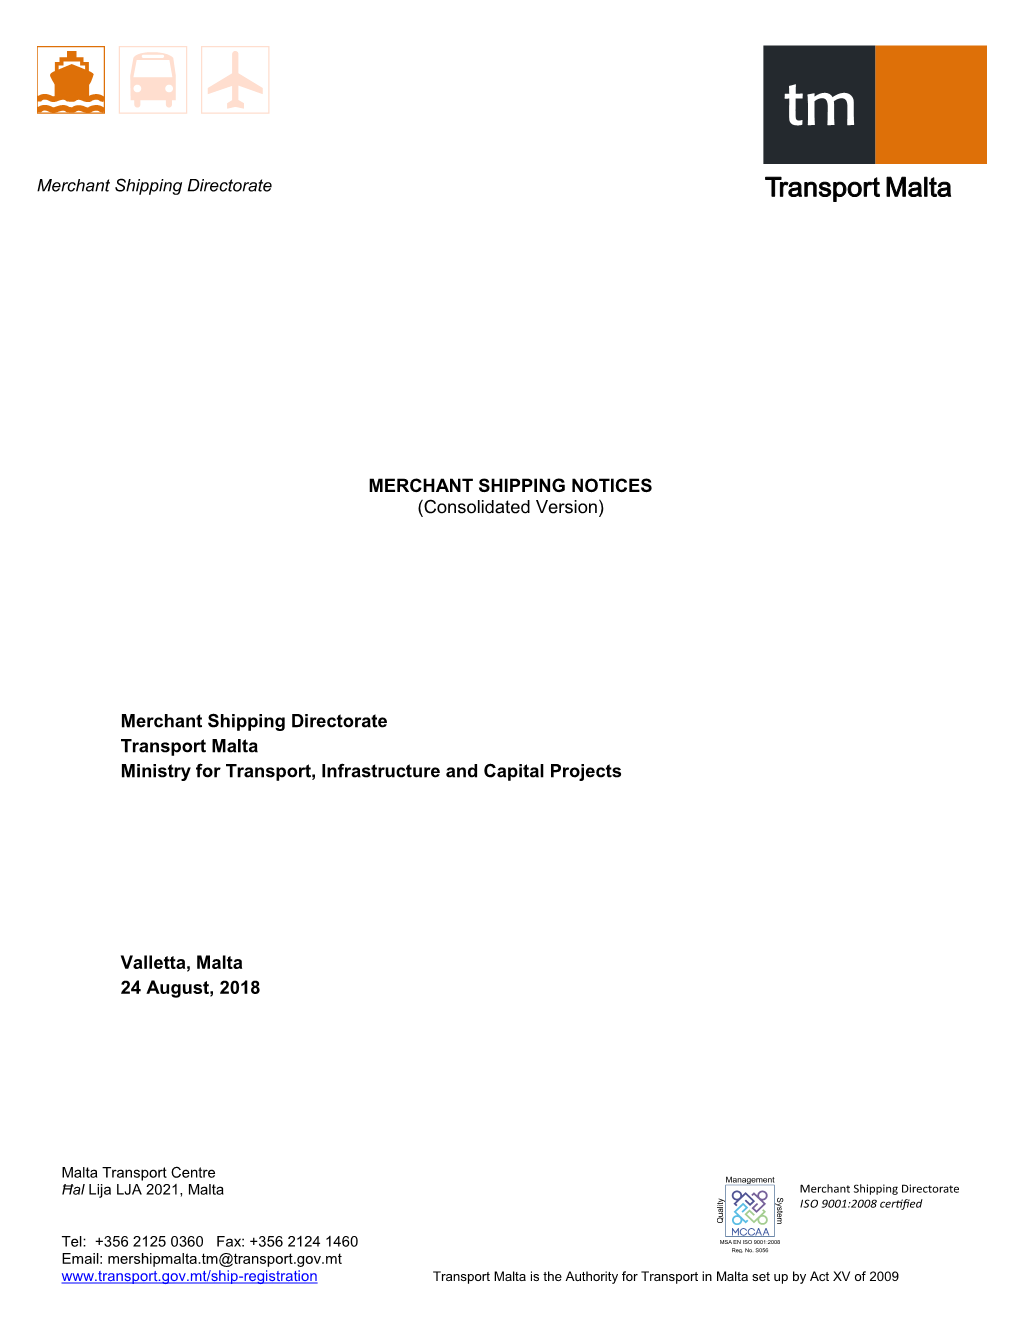 MERCHANT SHIPPING NOTICES (Consolidated Version)